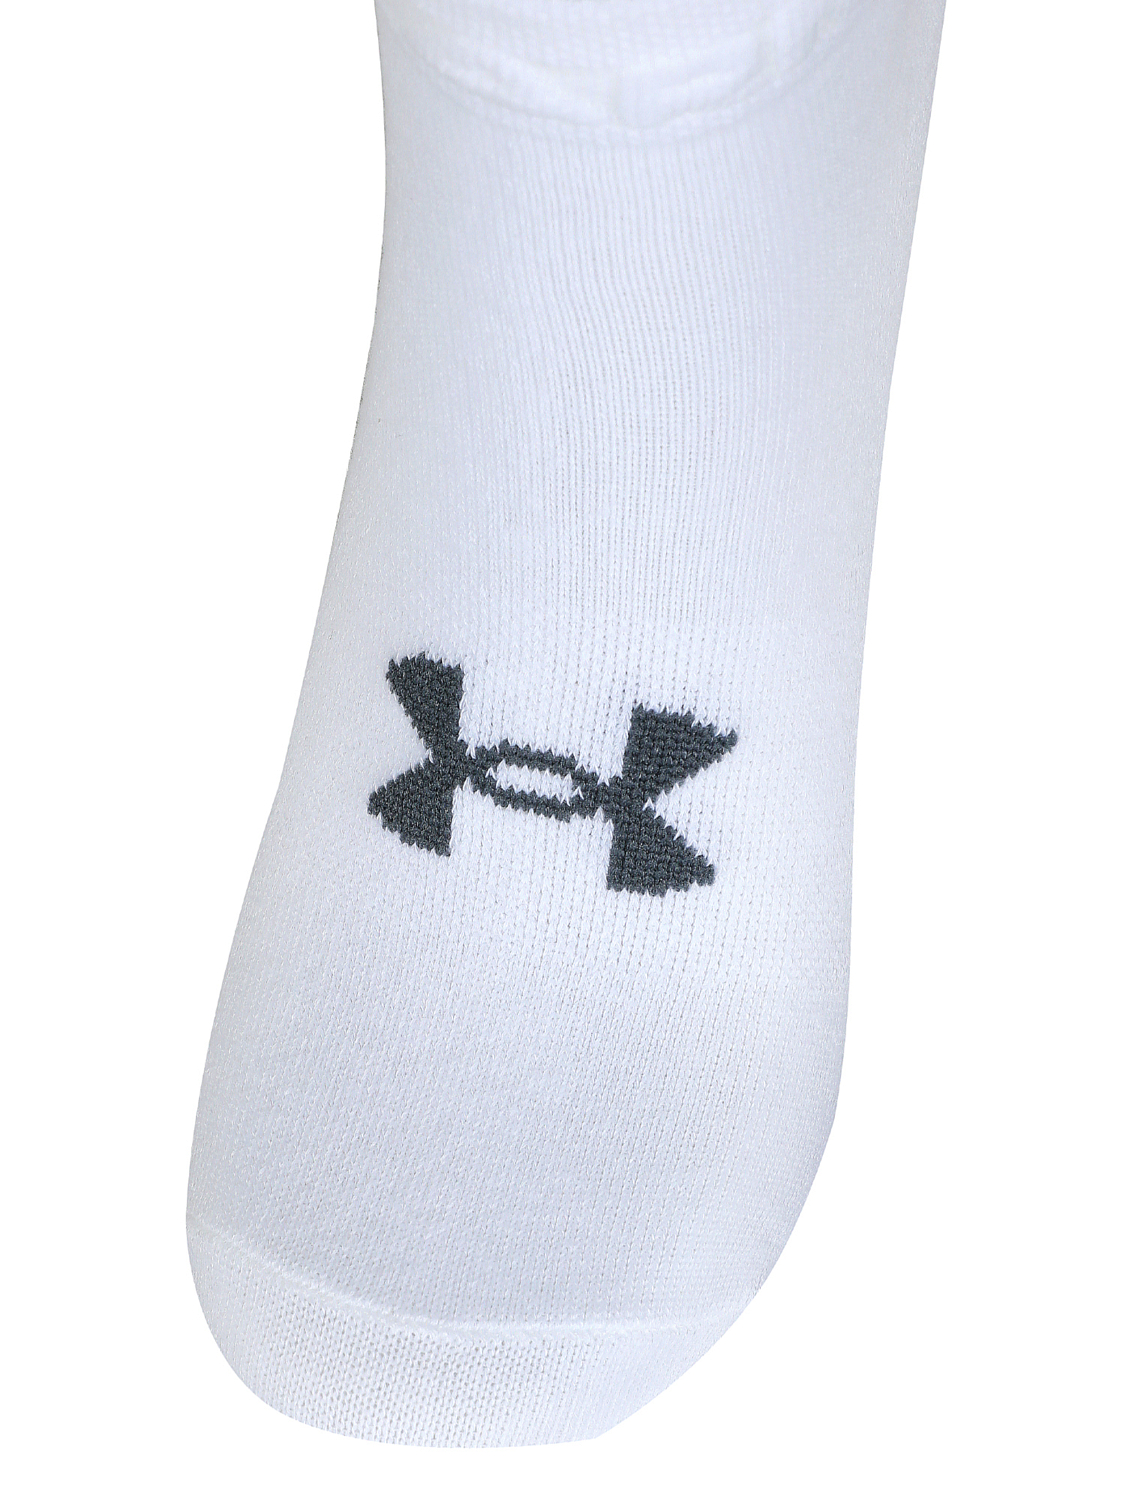 Носки Under Armour Essential Low Cut 3 Pack White